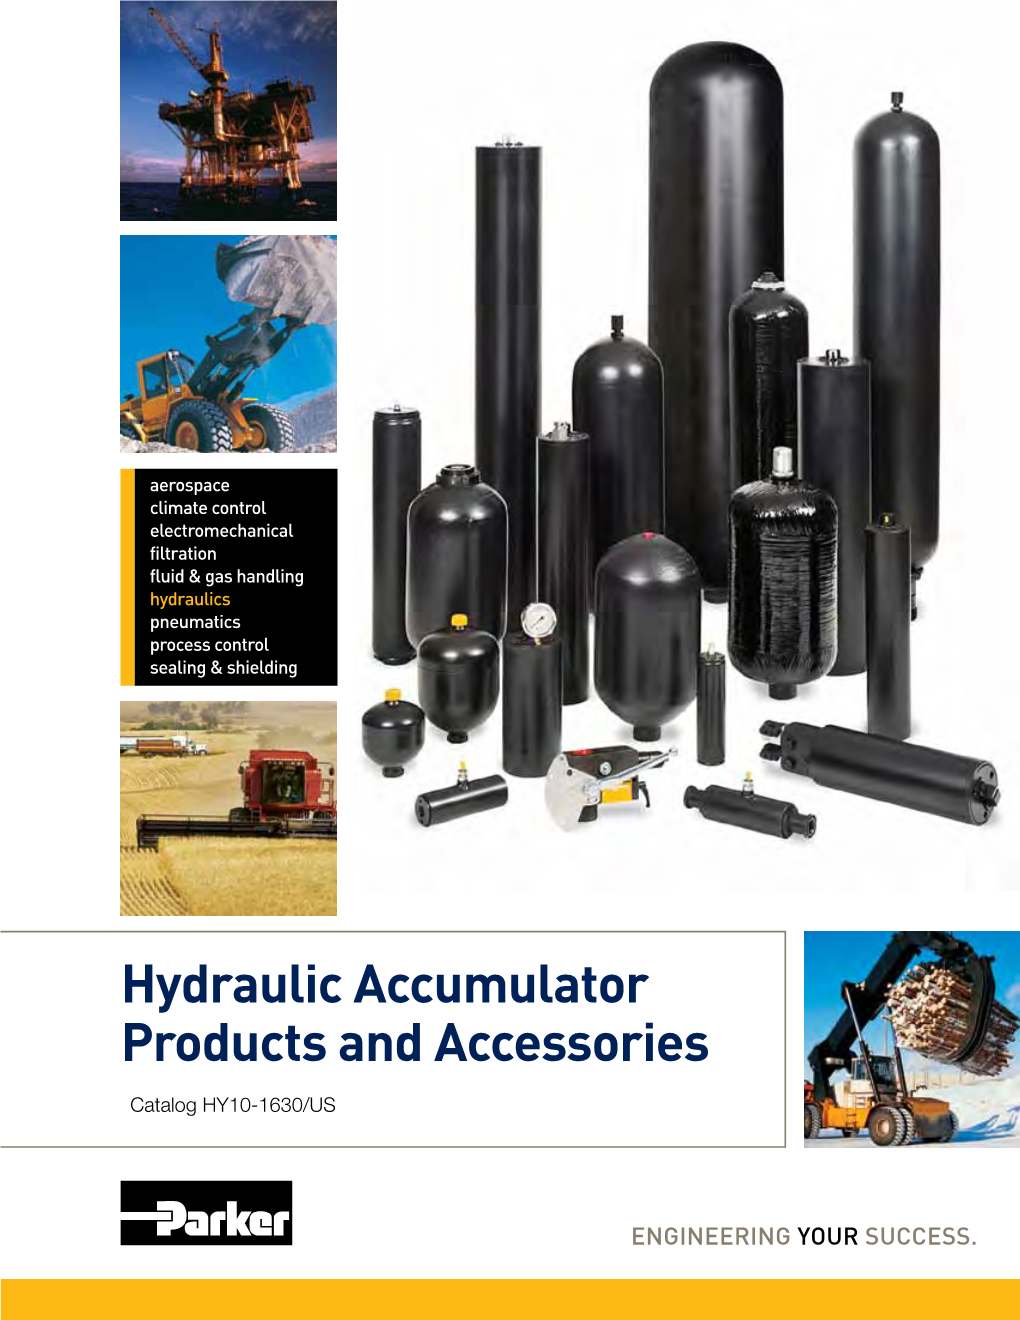 Hydraulic Accumulator Products and Accessories